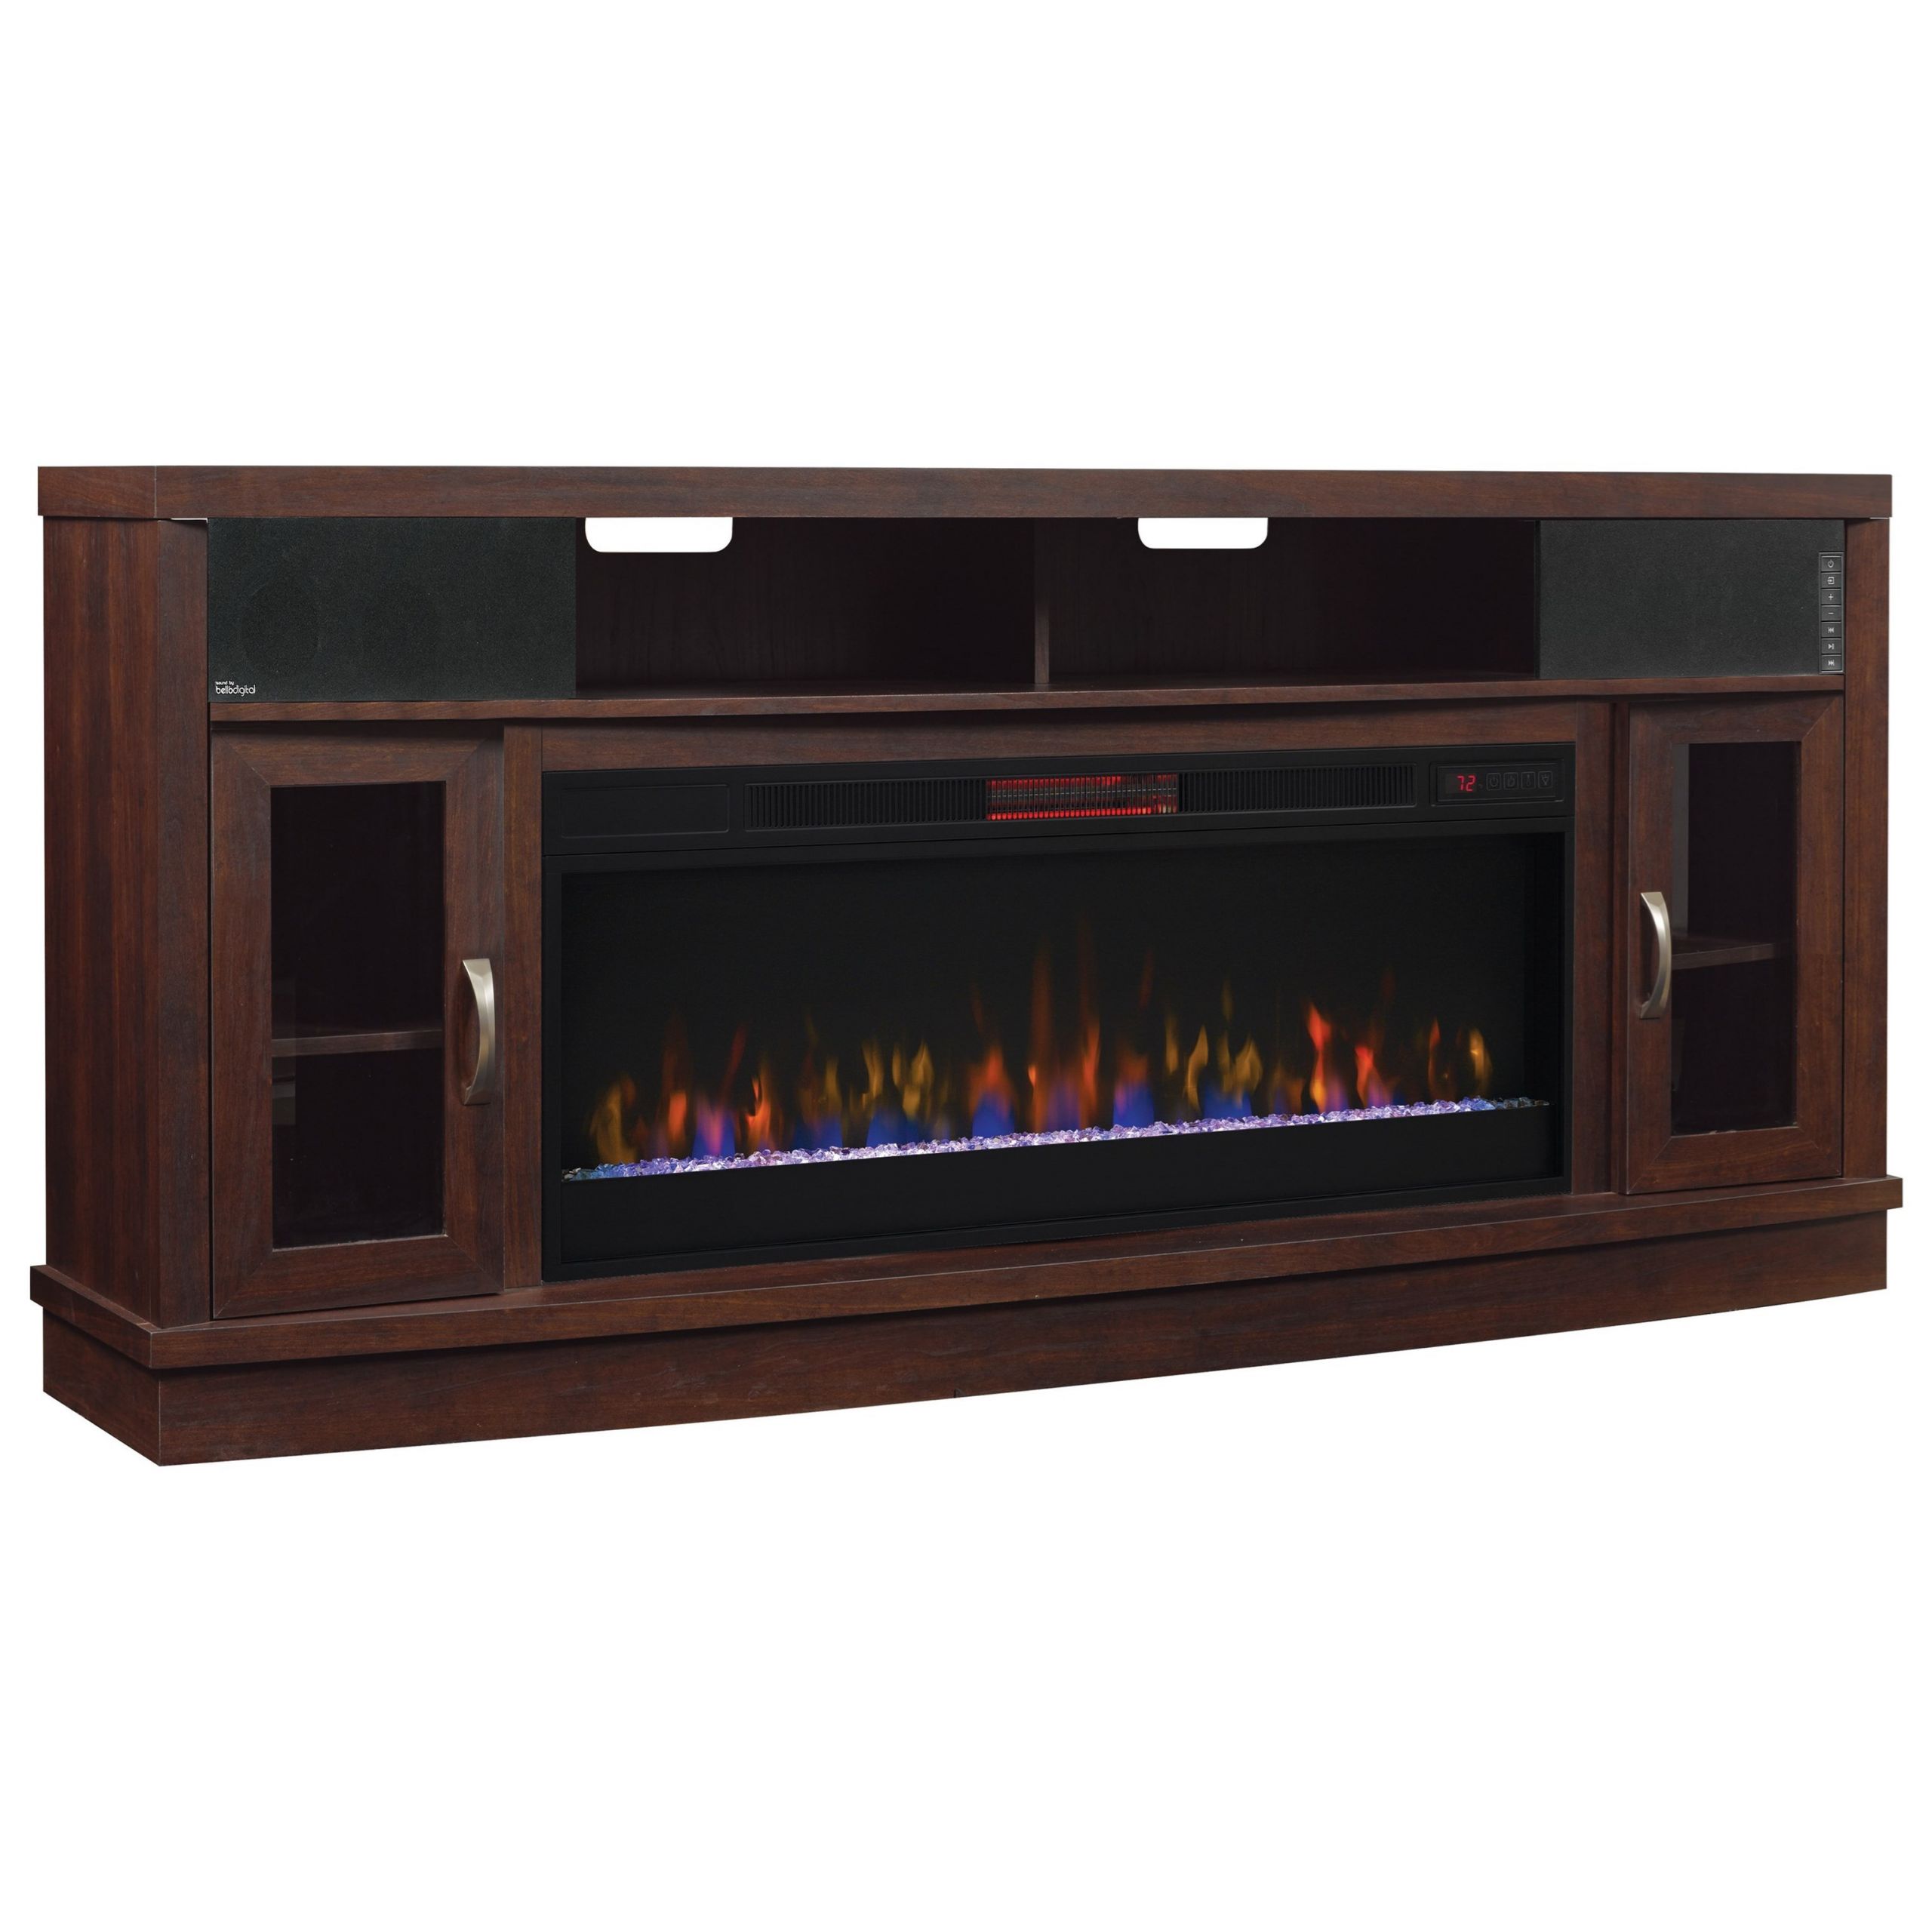 Electric Fireplace With Speakers
 ClassicFlame Deerfield Media Mantel With 42" Electric